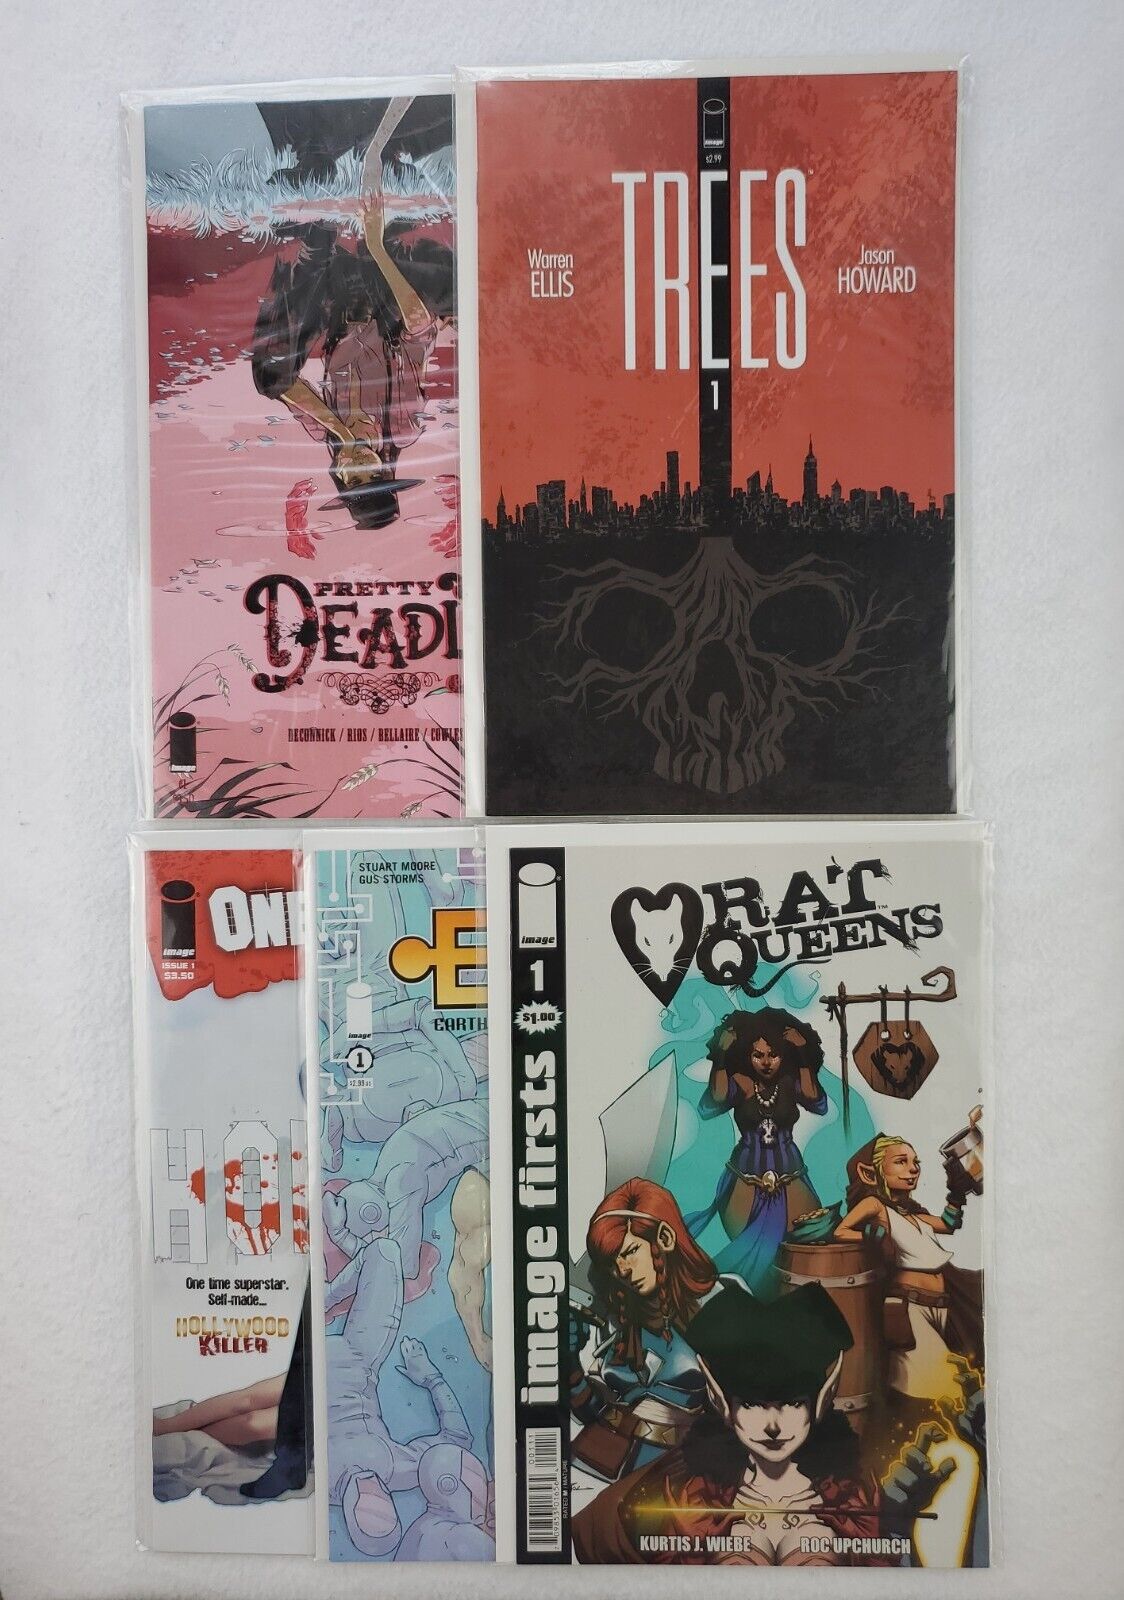 Mixed Lot of 5 Image Comic Books #1 Issues Rat Queens Pretty Deadly Trees EGOs